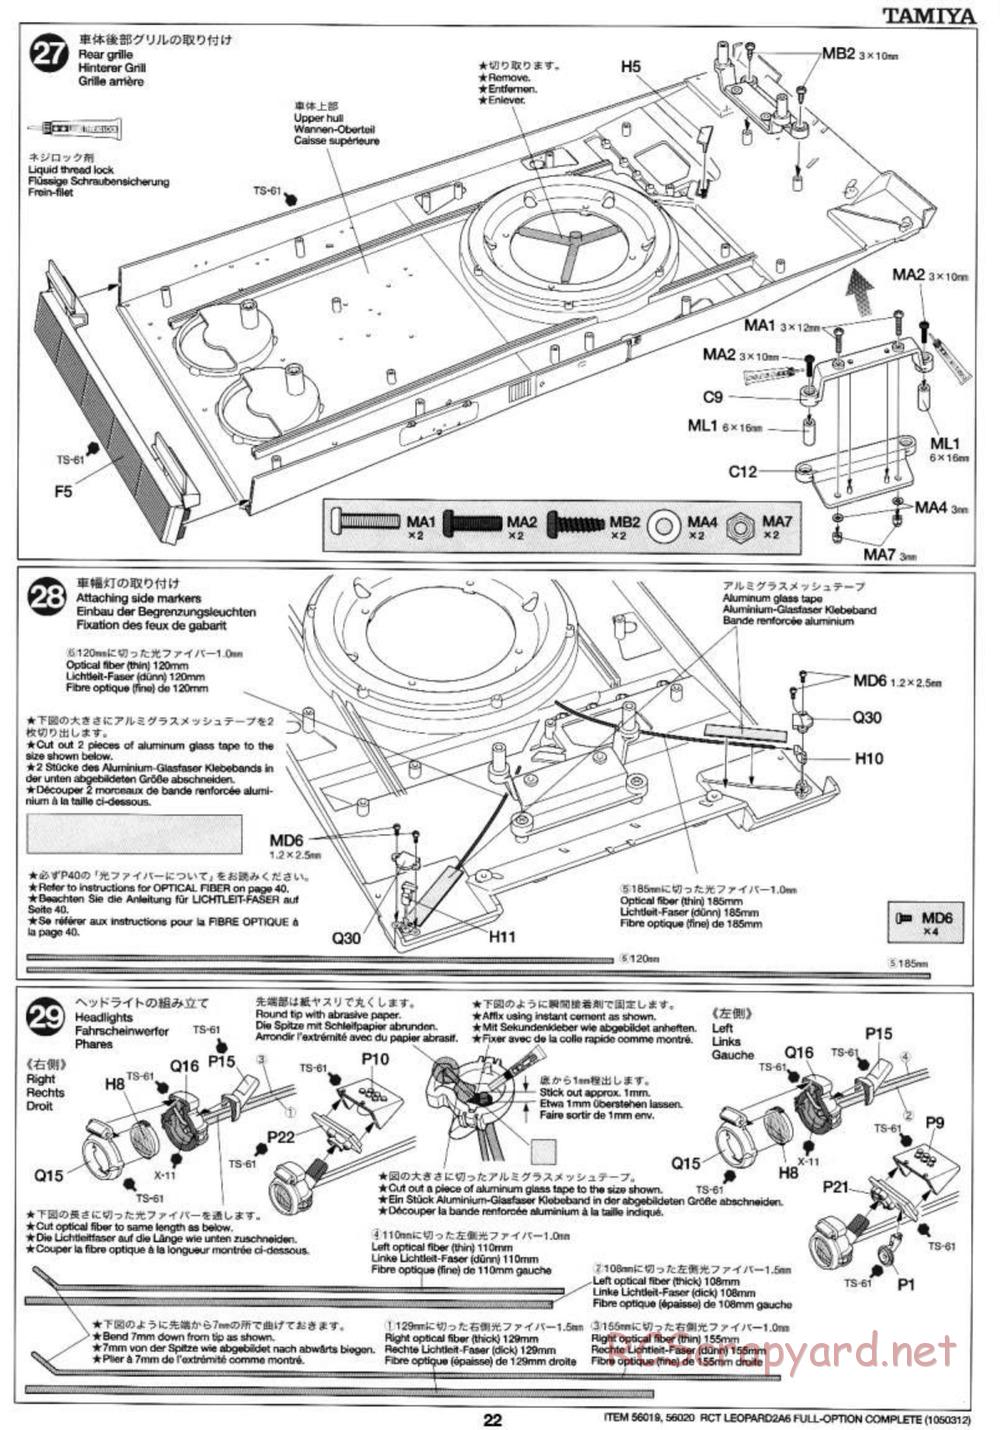 Tamiya - Leopard 2 A6 - 1/16 Scale Chassis - Manual - Page 22